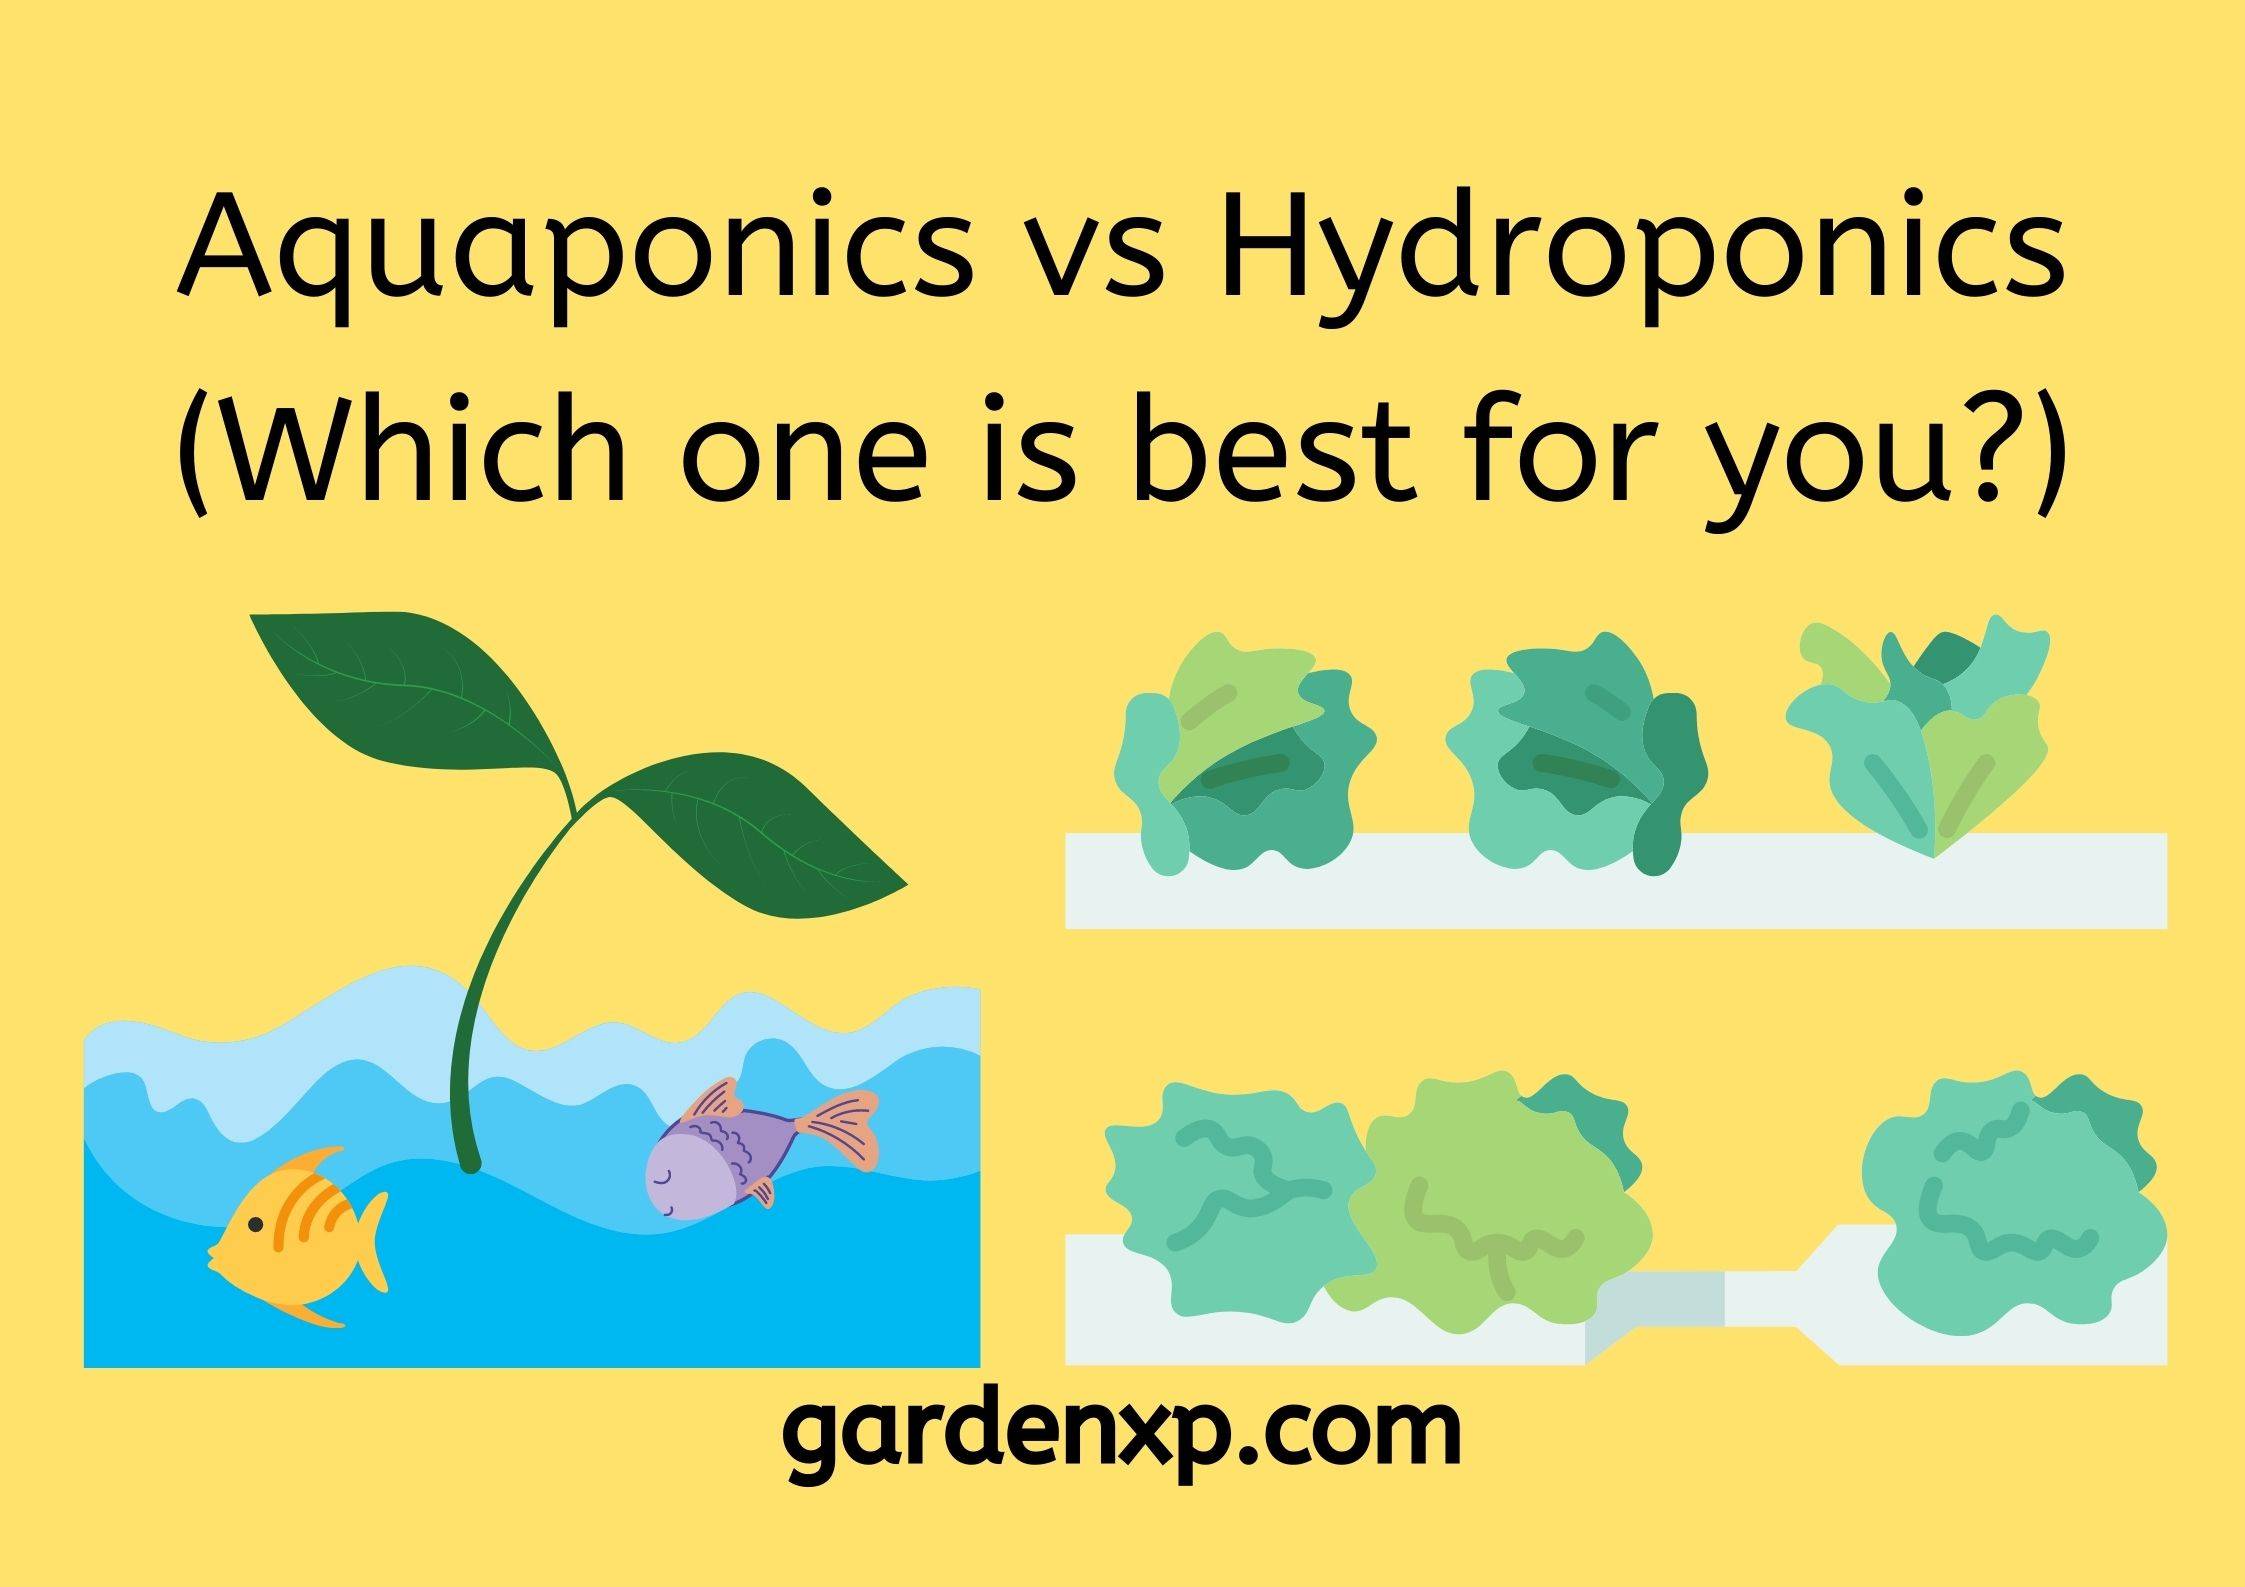 Aquaponics vs Hydroponics (Which one is best for you?)